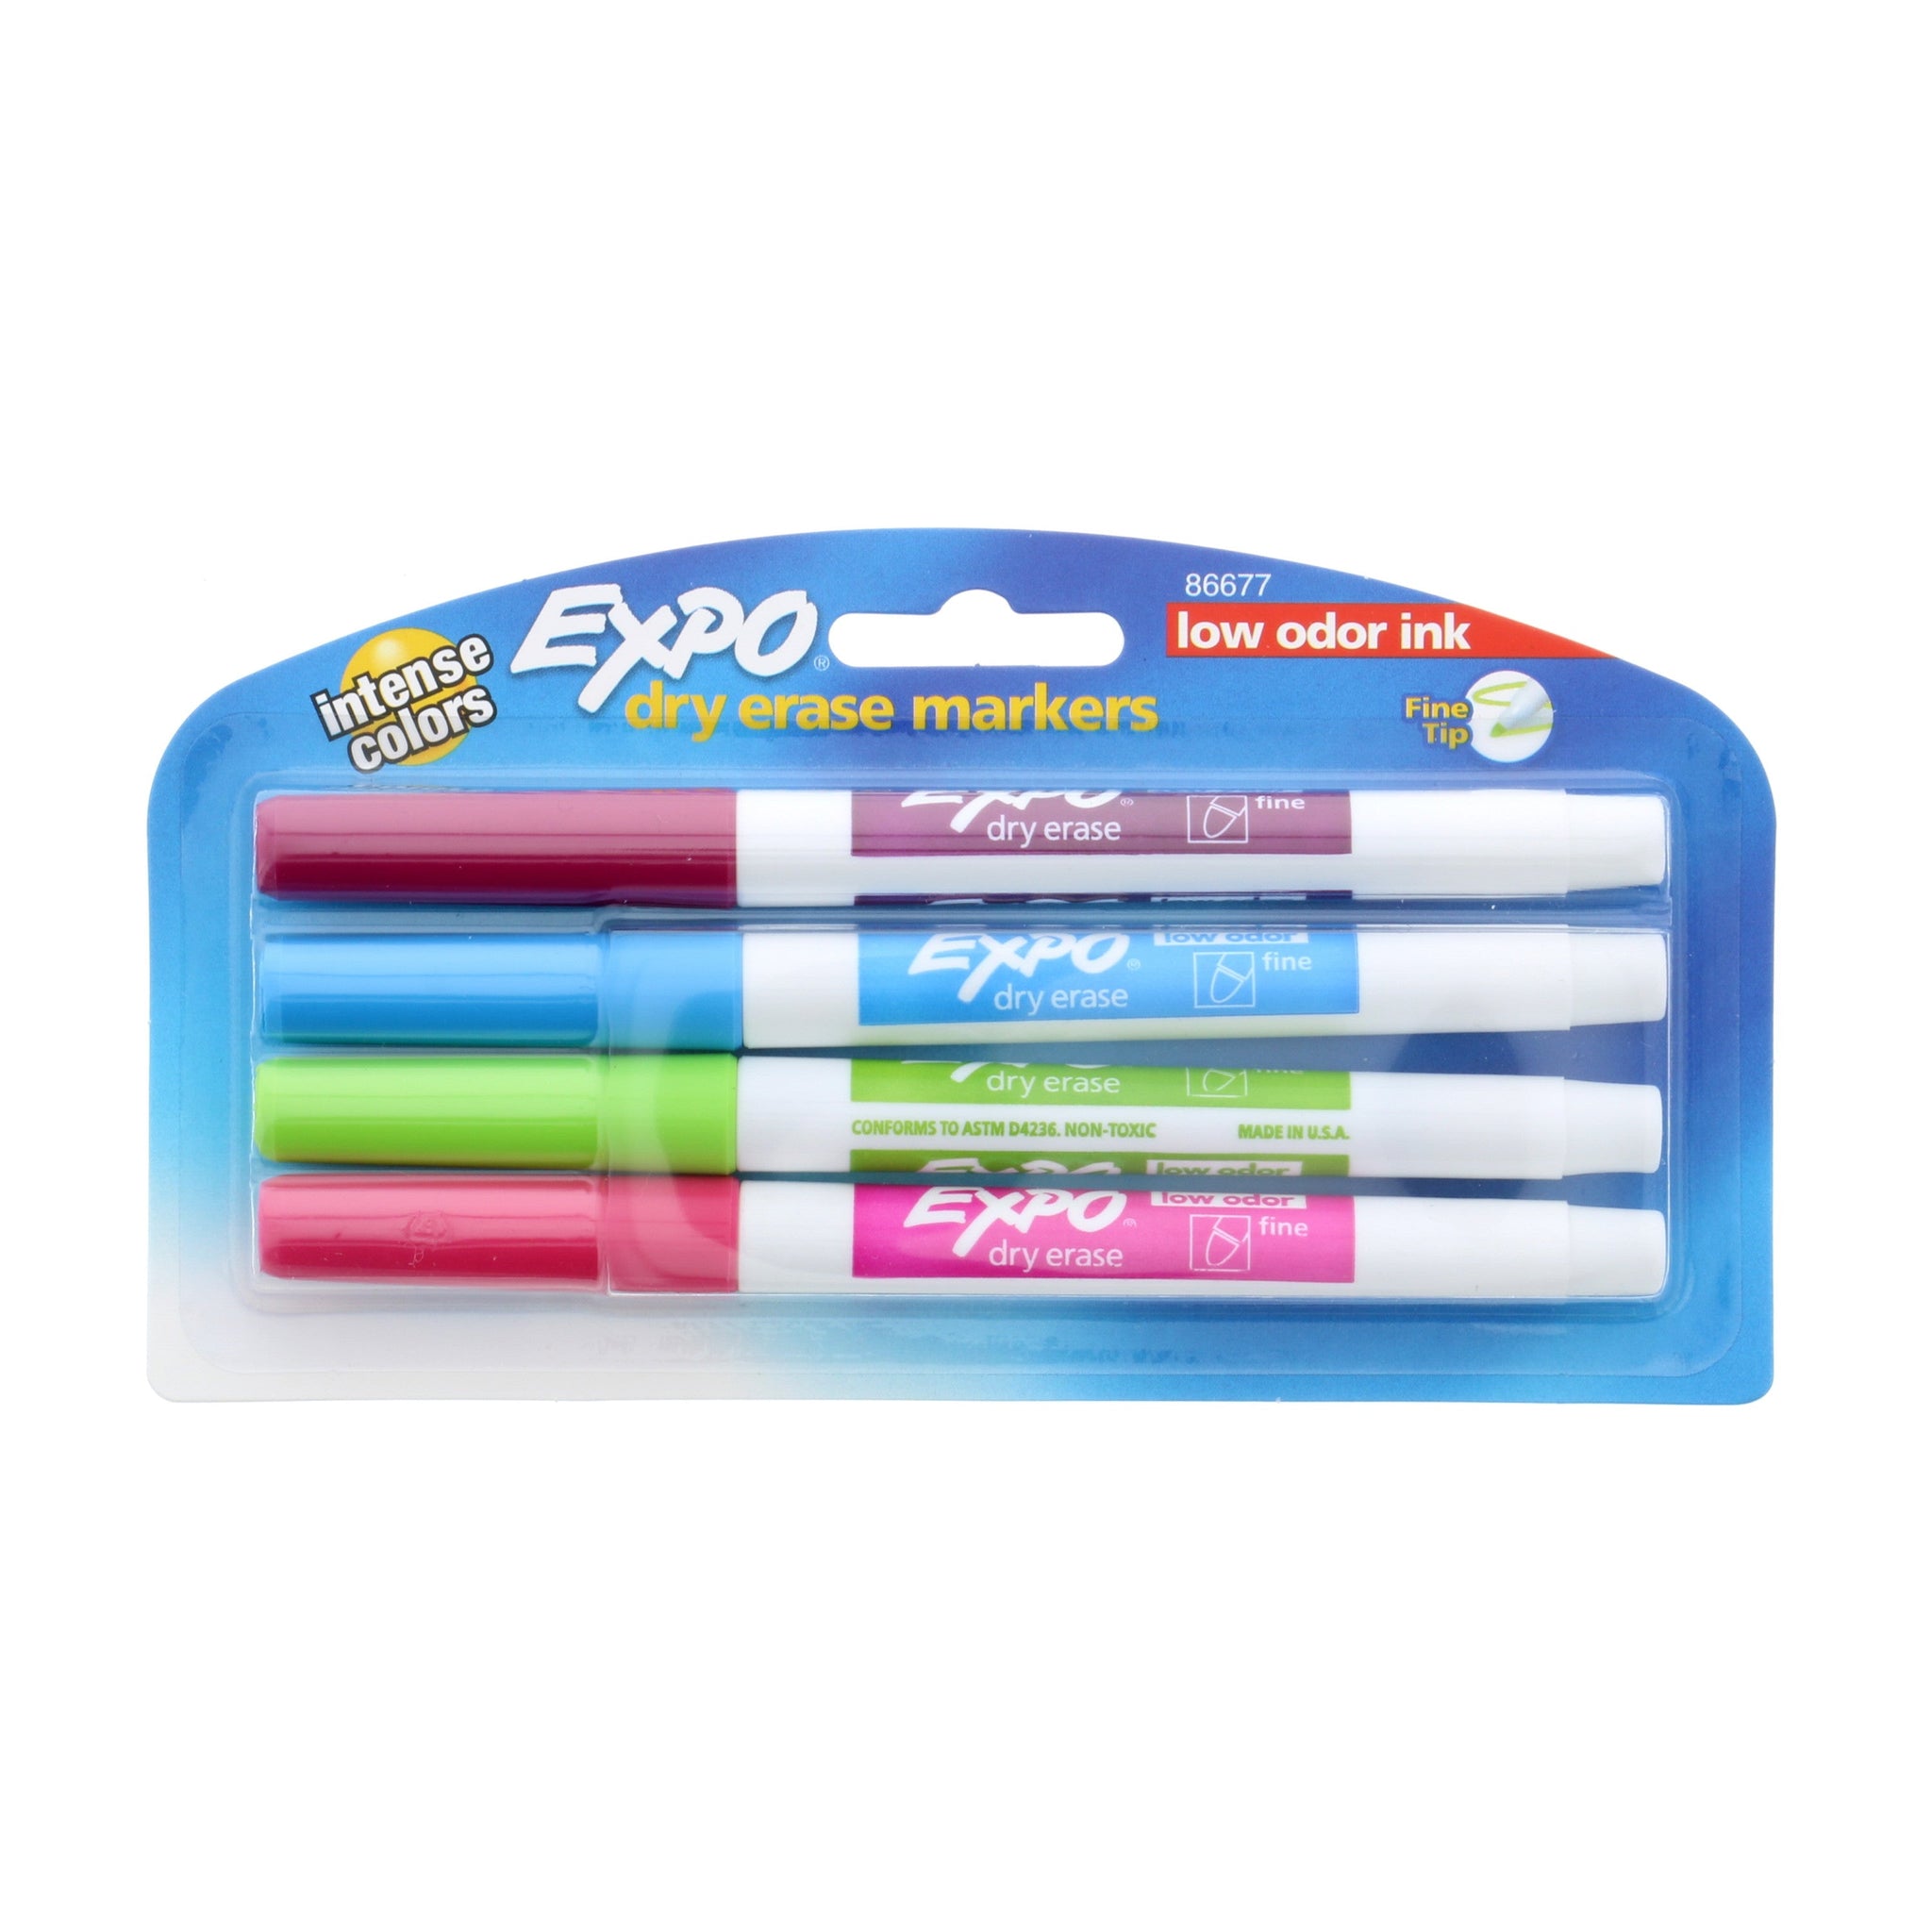 Live - Honest review of  Basics dry erase markers